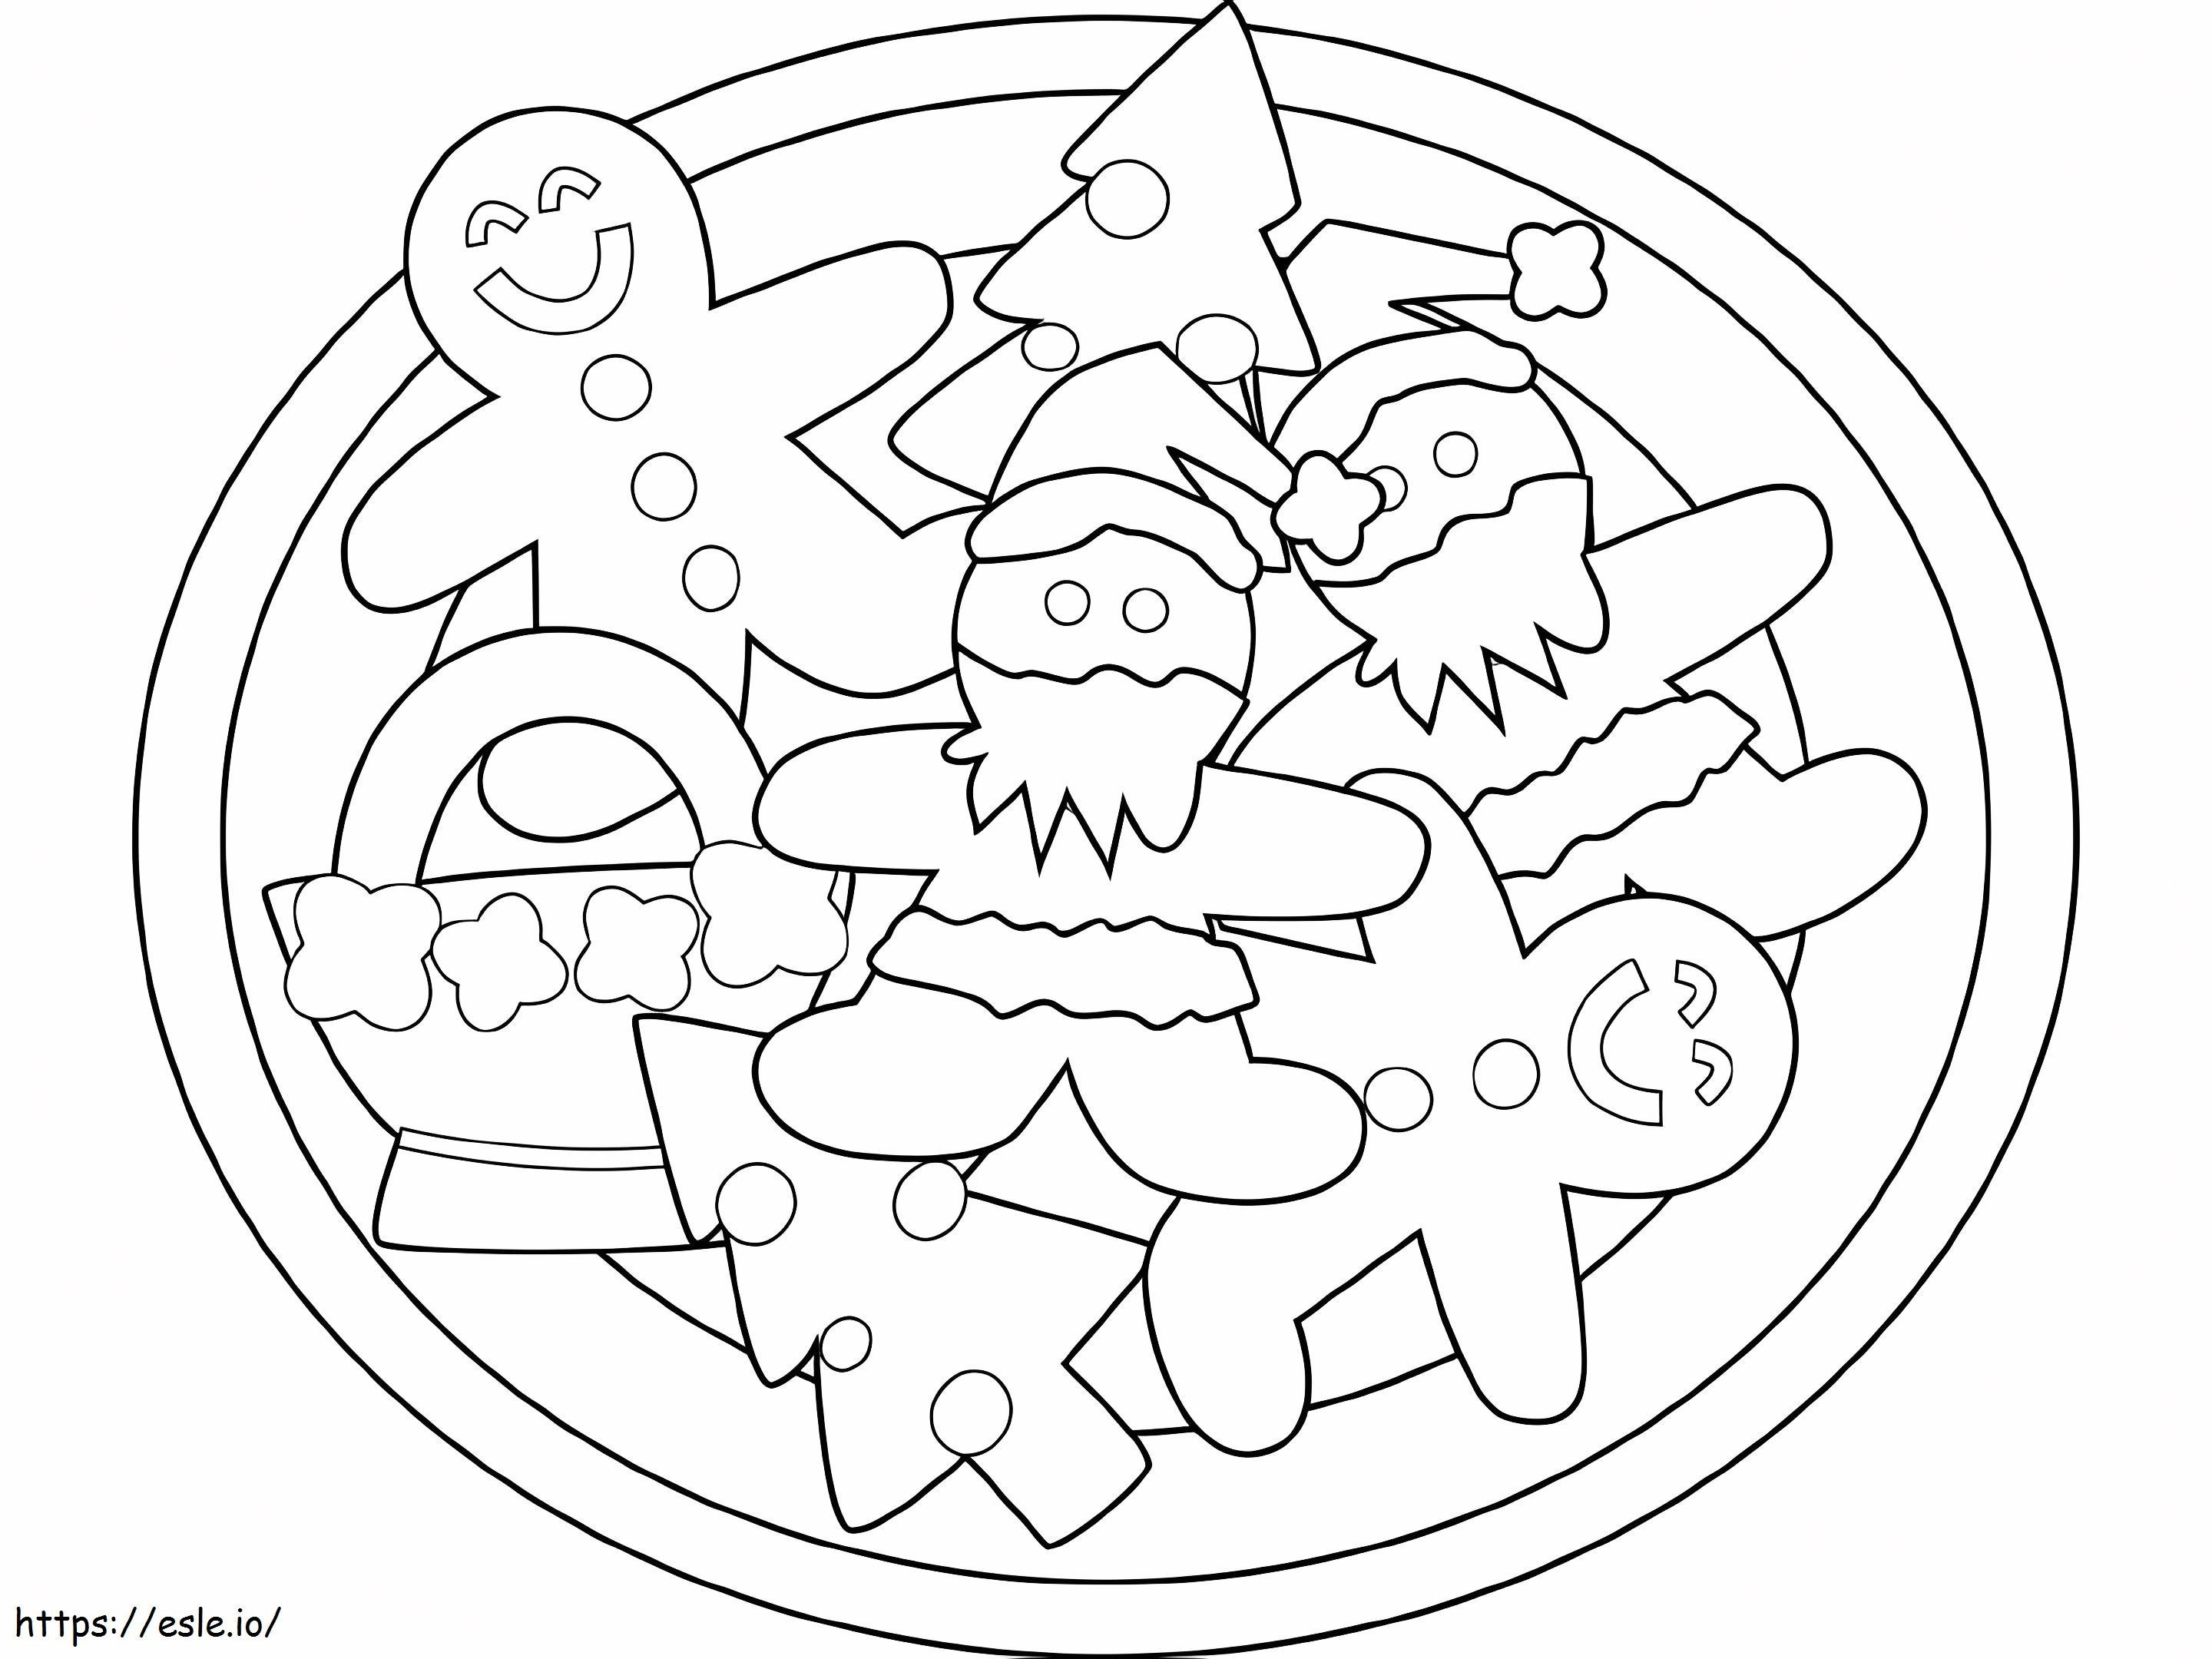 Christmas Cookies 8 coloring page